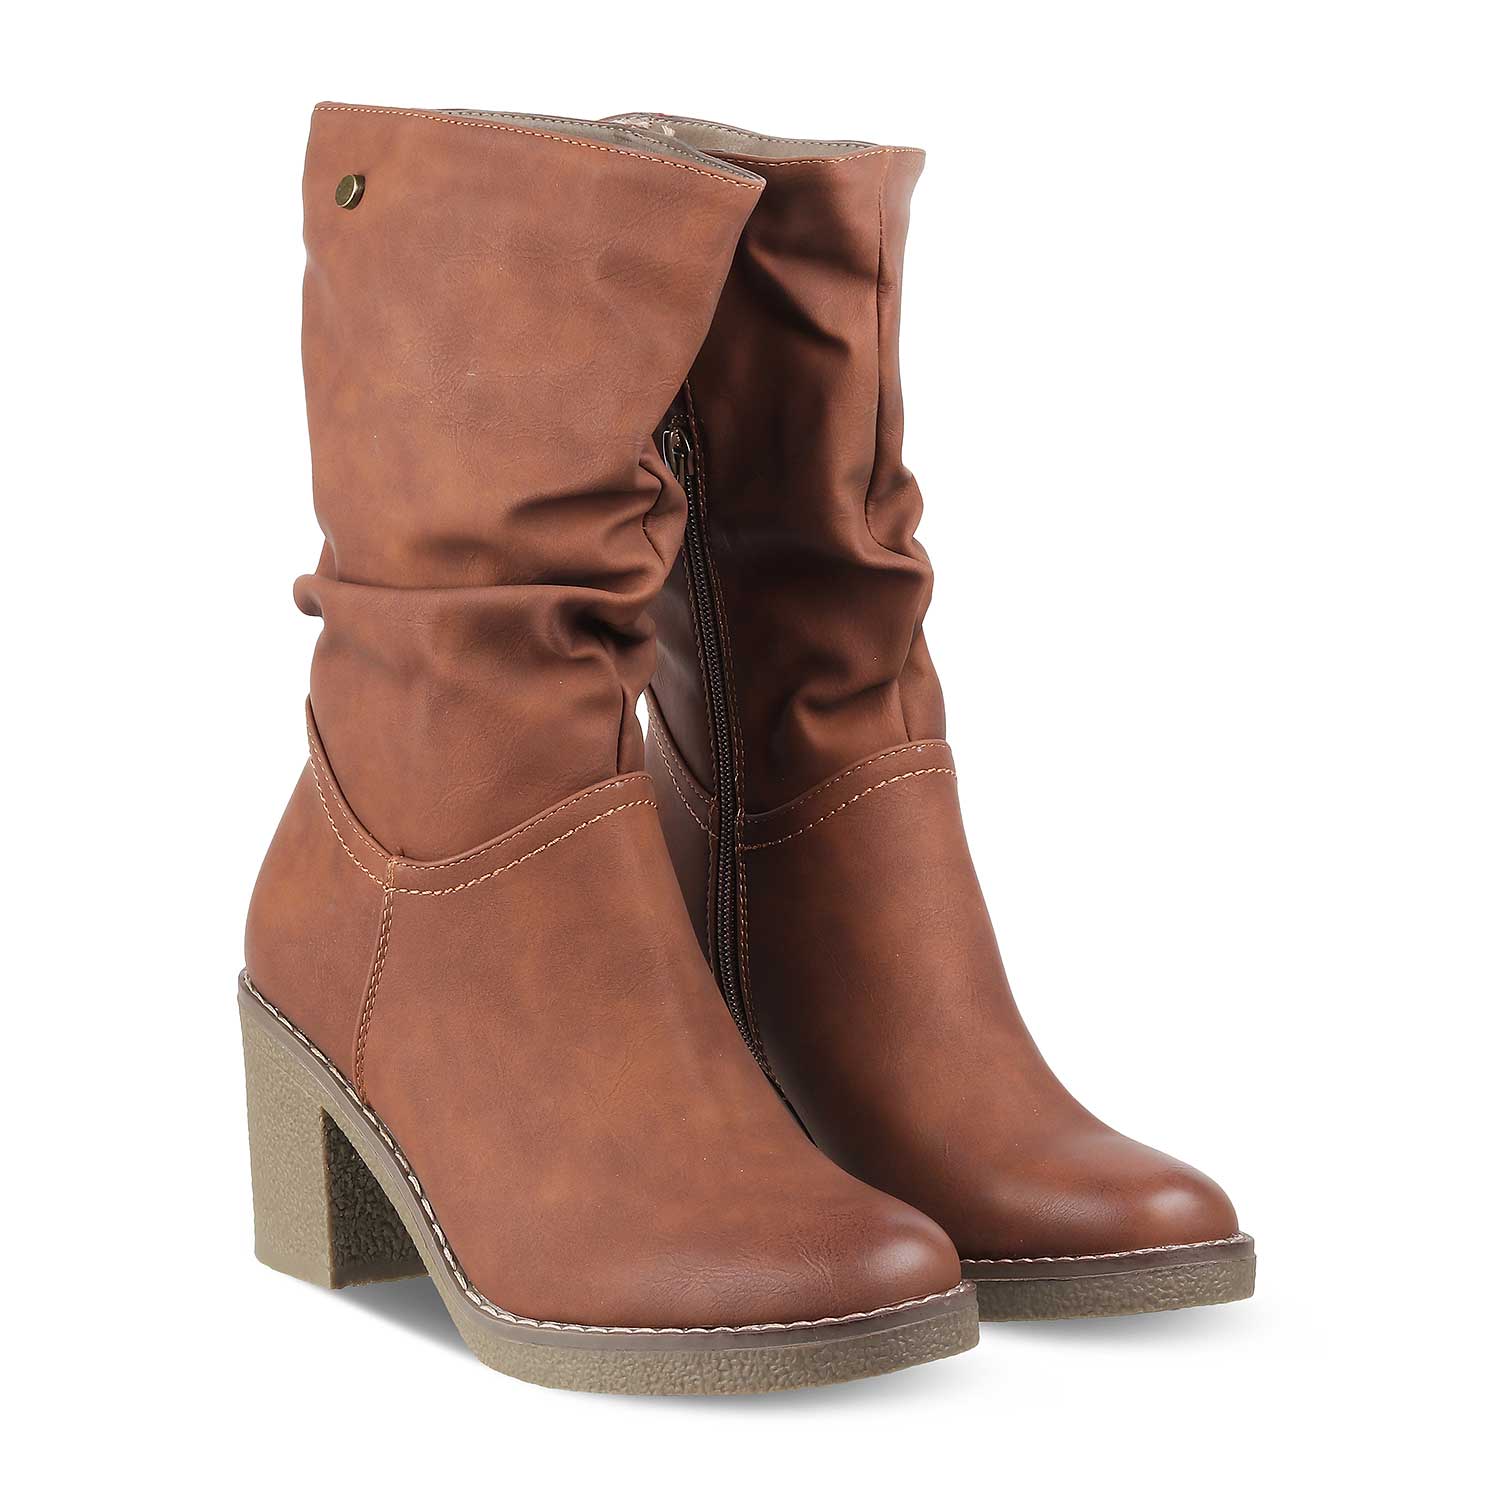 The Keflav Tan Women's Ankle-length Boots Tresmode - Tresmode